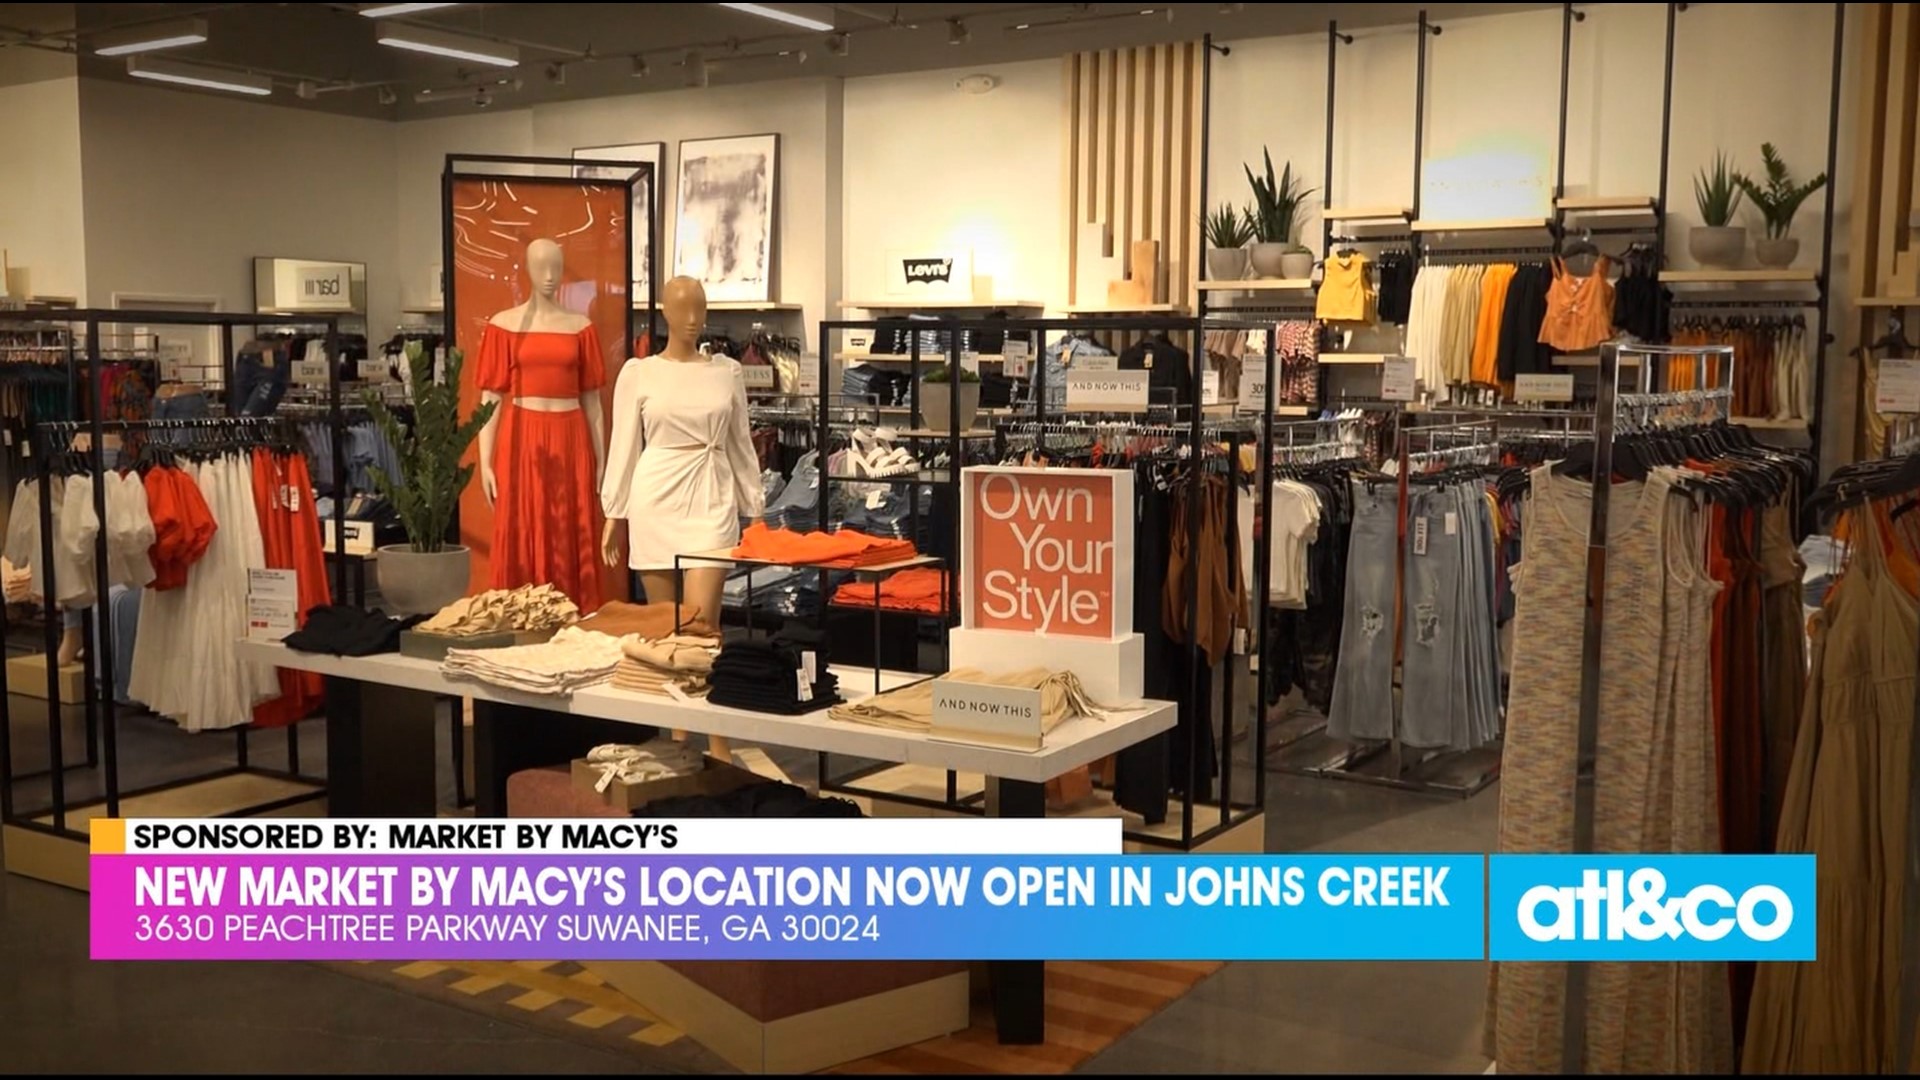 It's the Macy's you know and love — just a smaller version! Check out the new Market by Macy's location, now open in Johns Creek.